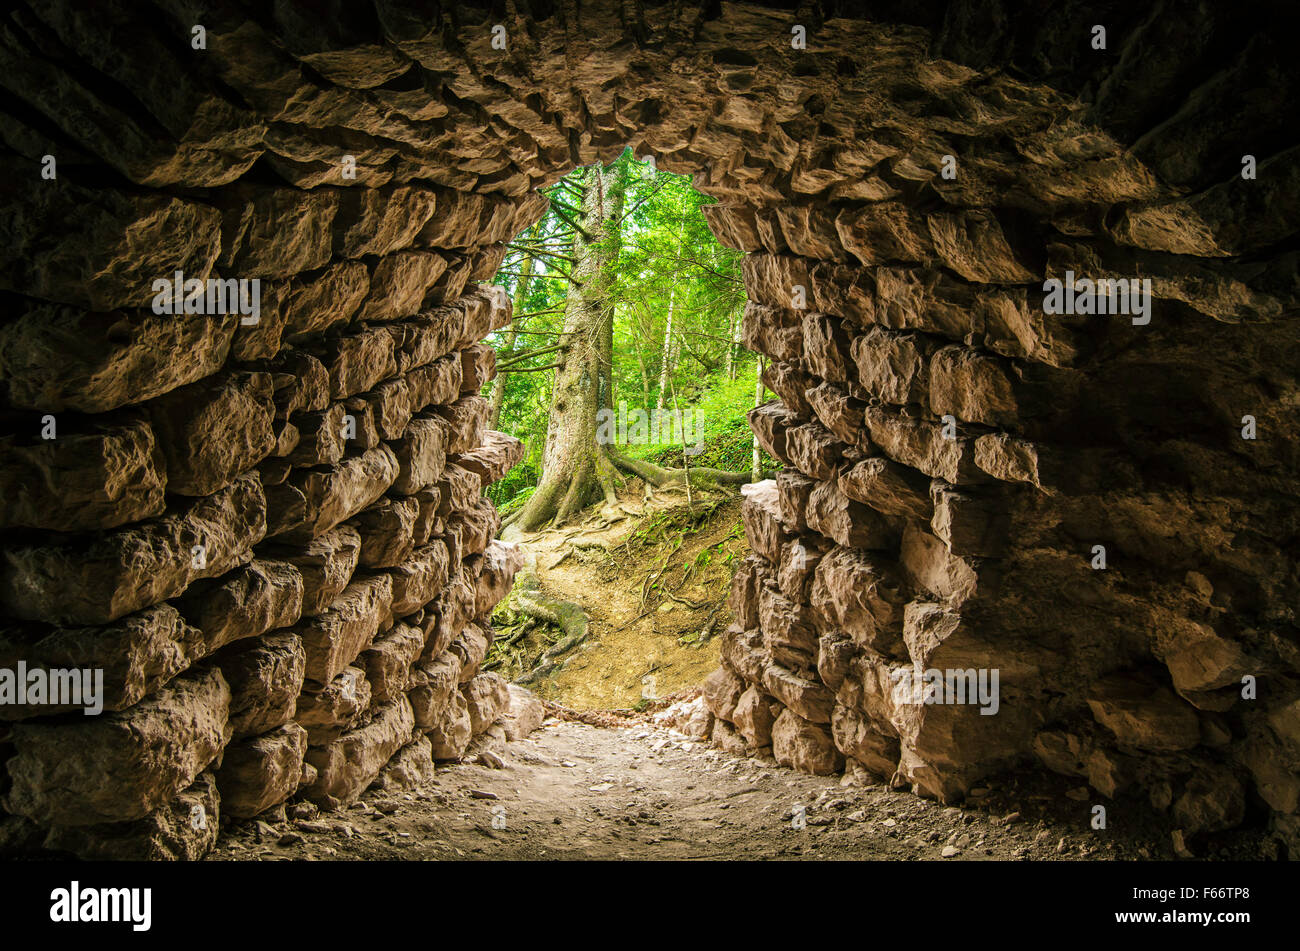 Tunnel entrance in the Forest Stock Photo